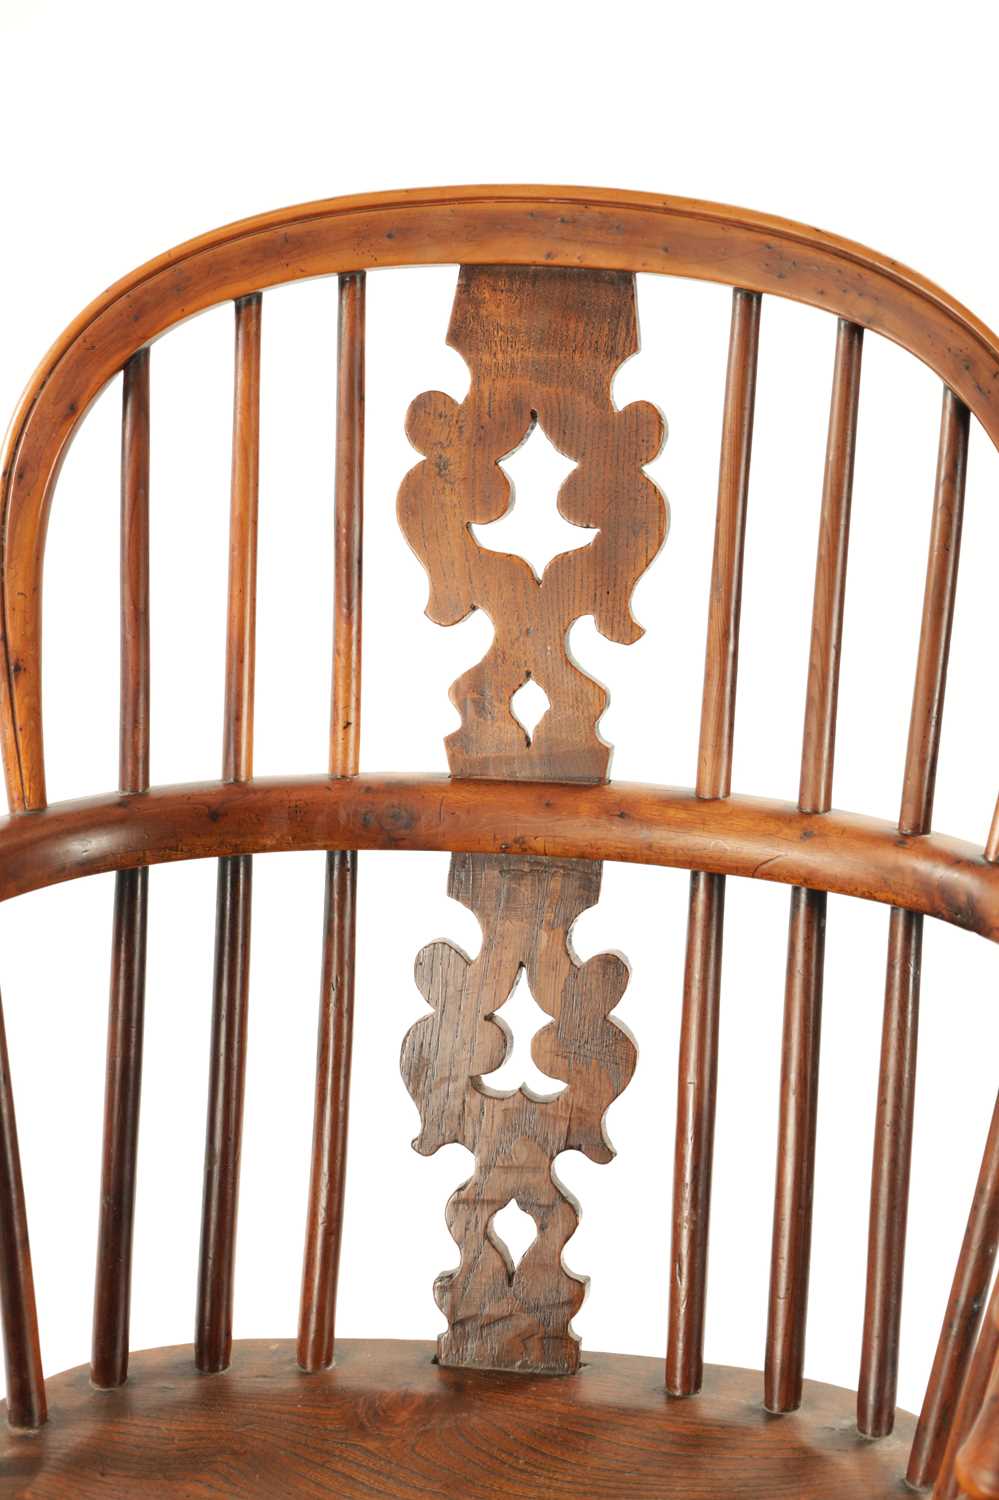 AN EARLY 19TH CENTURY NOTTINGHAMSHIRE YEW-WOOD LOW BACK WINDSOR CHAIR - Image 2 of 8